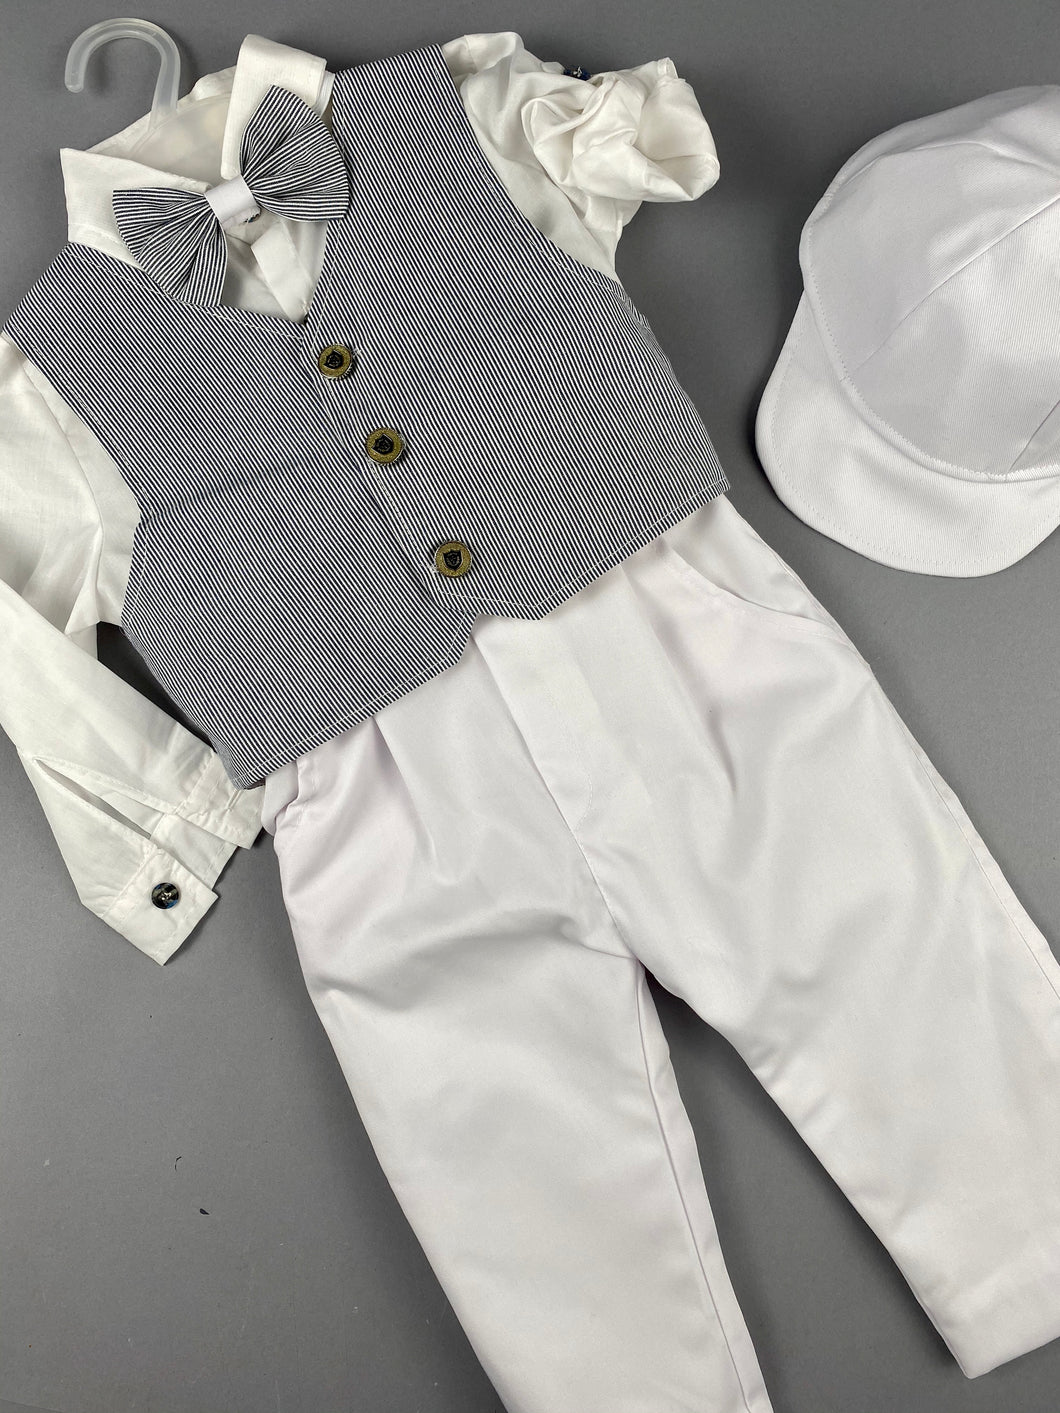 Rosies Collections 7pc full suit, Dress shirt With Cuff sleeves, White Pants, Navy Blue Pinstripe Jacket, Vest, Belt or Suspenders, Cap. Made in Greece exclusively for Rosies Collections S201911